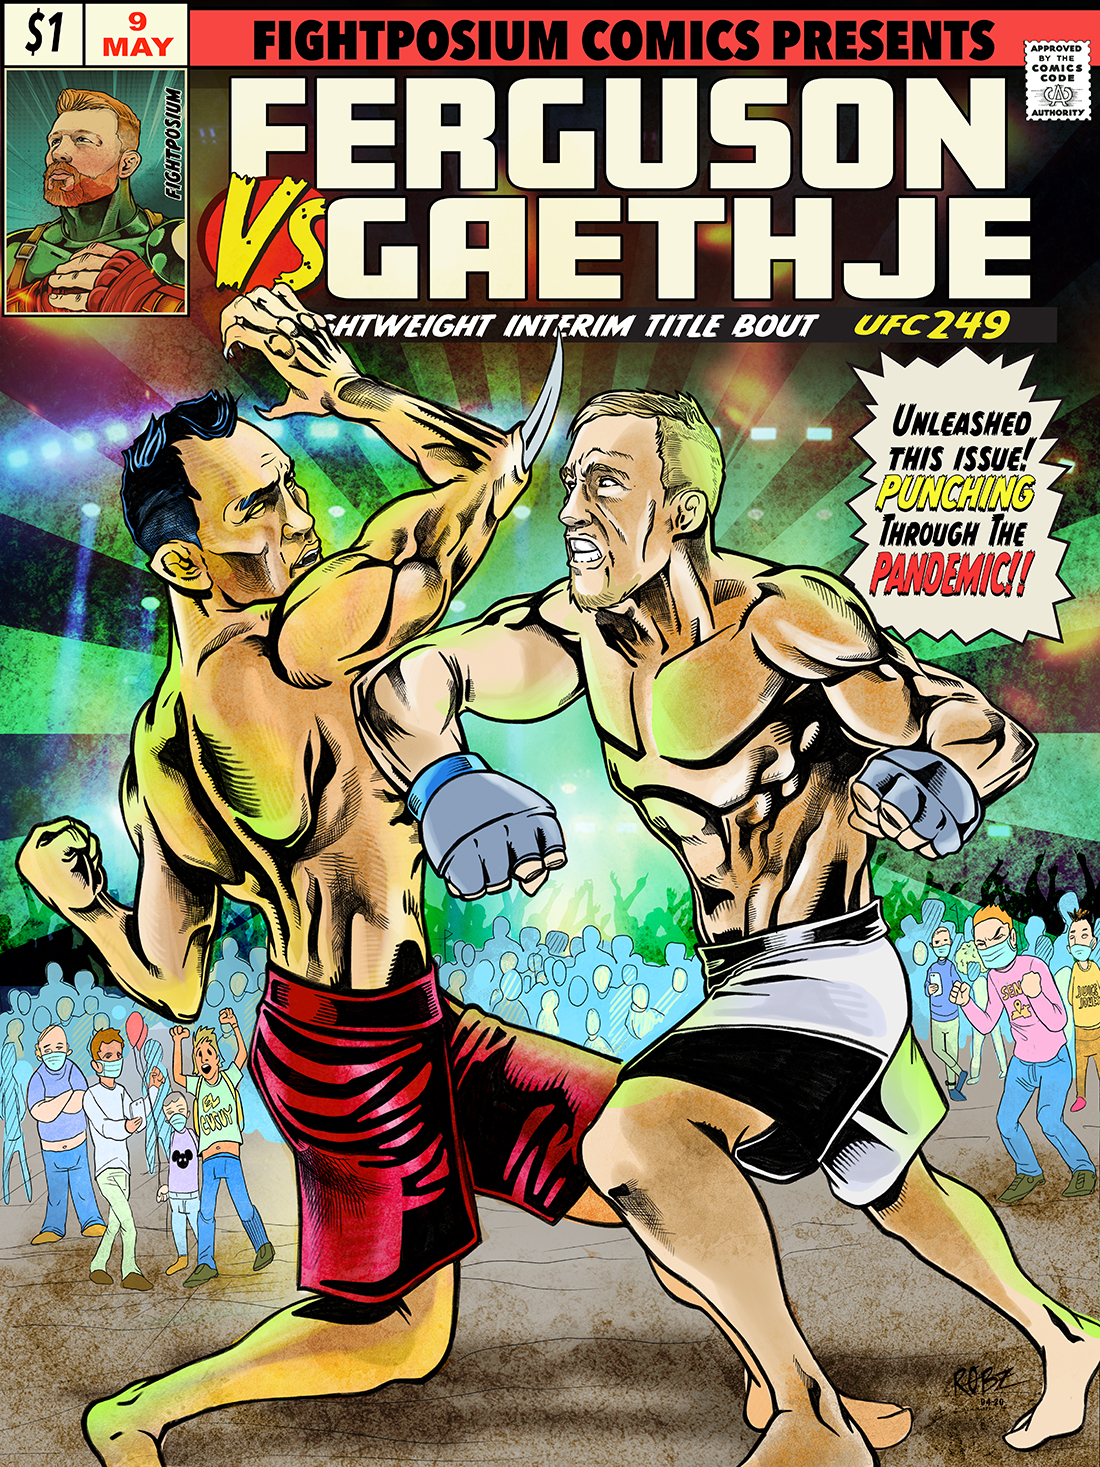 You are currently viewing Ferguson VS Gaethje – Punching Through The Pandemic!